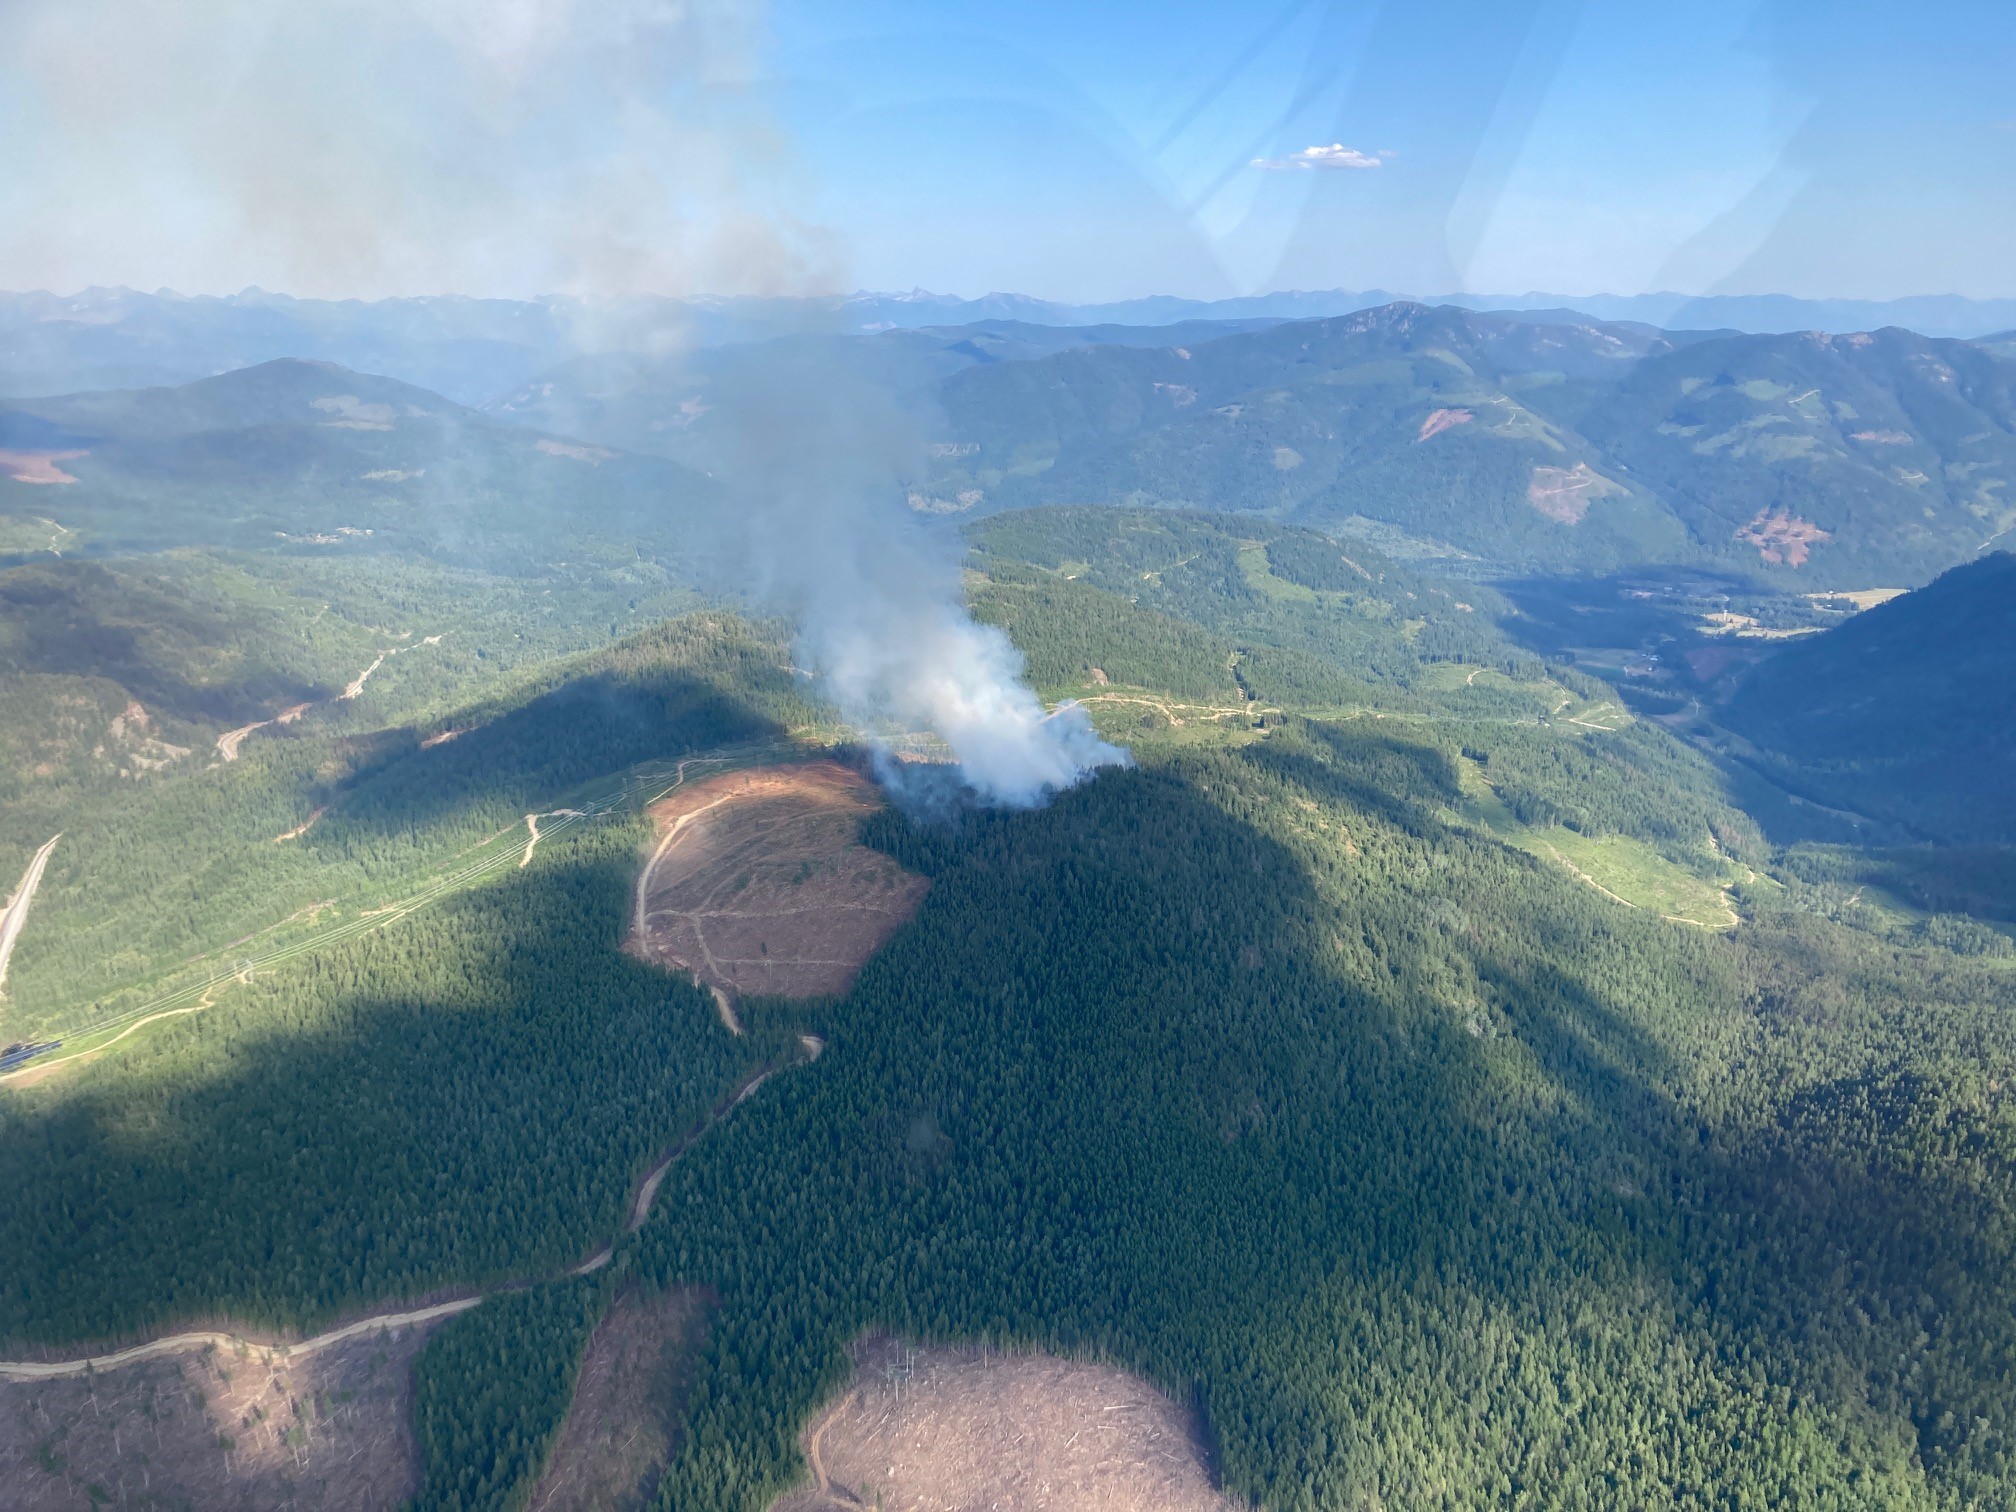 Updated: Bombi fire now roughly 35 hectares, still out of control